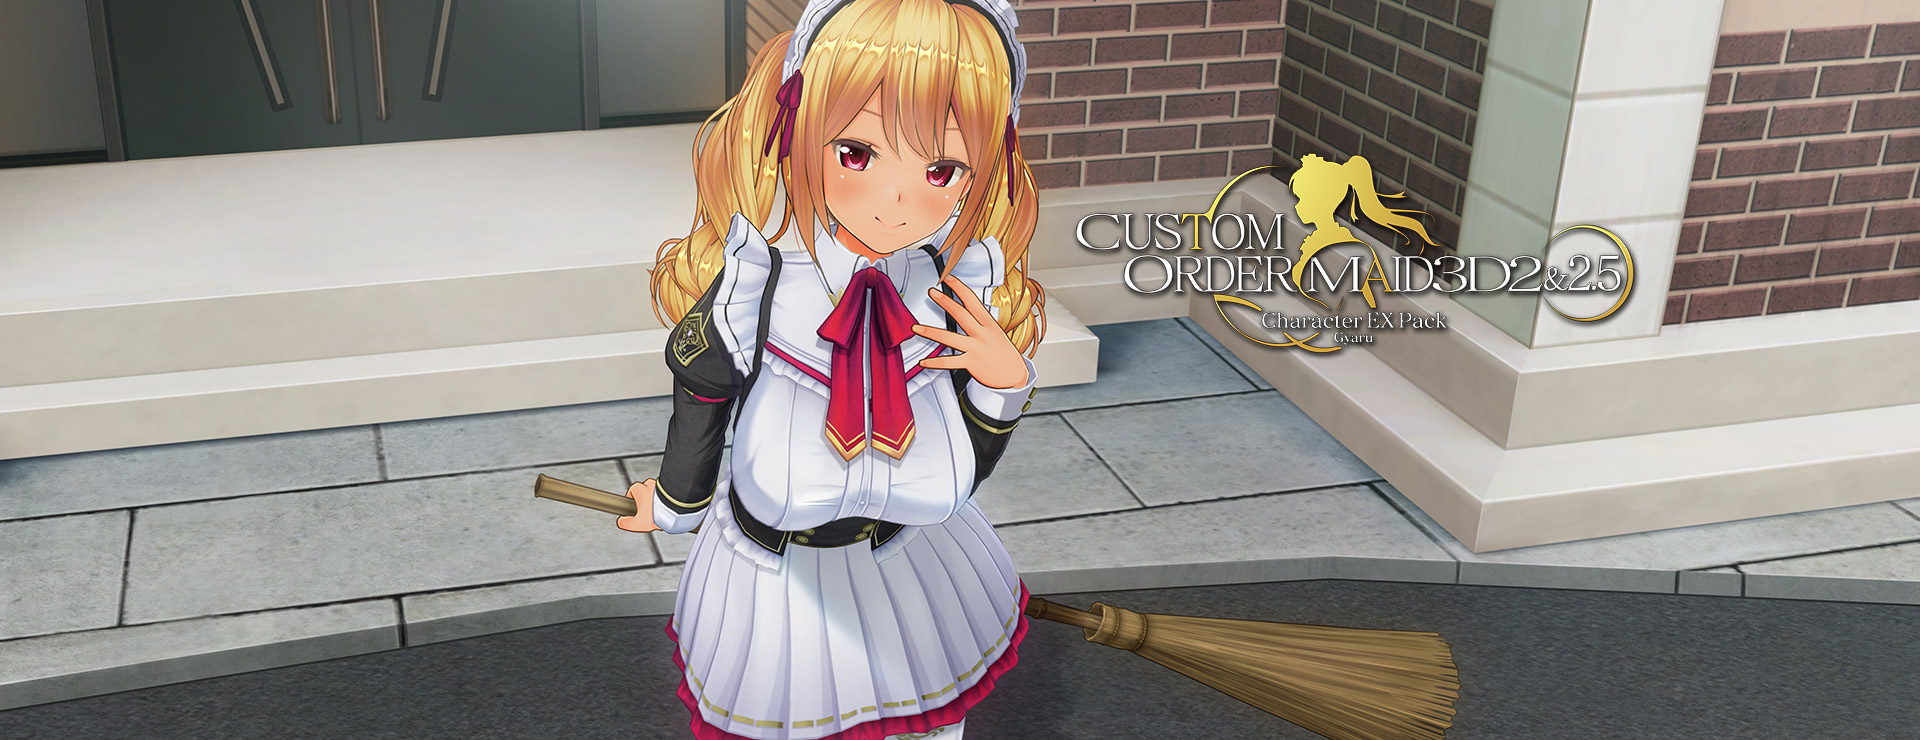 Custom Order Maid 3D 2: Character EX Pack Gyaru High Poly All In One Edition - 仿真游戏 遊戲